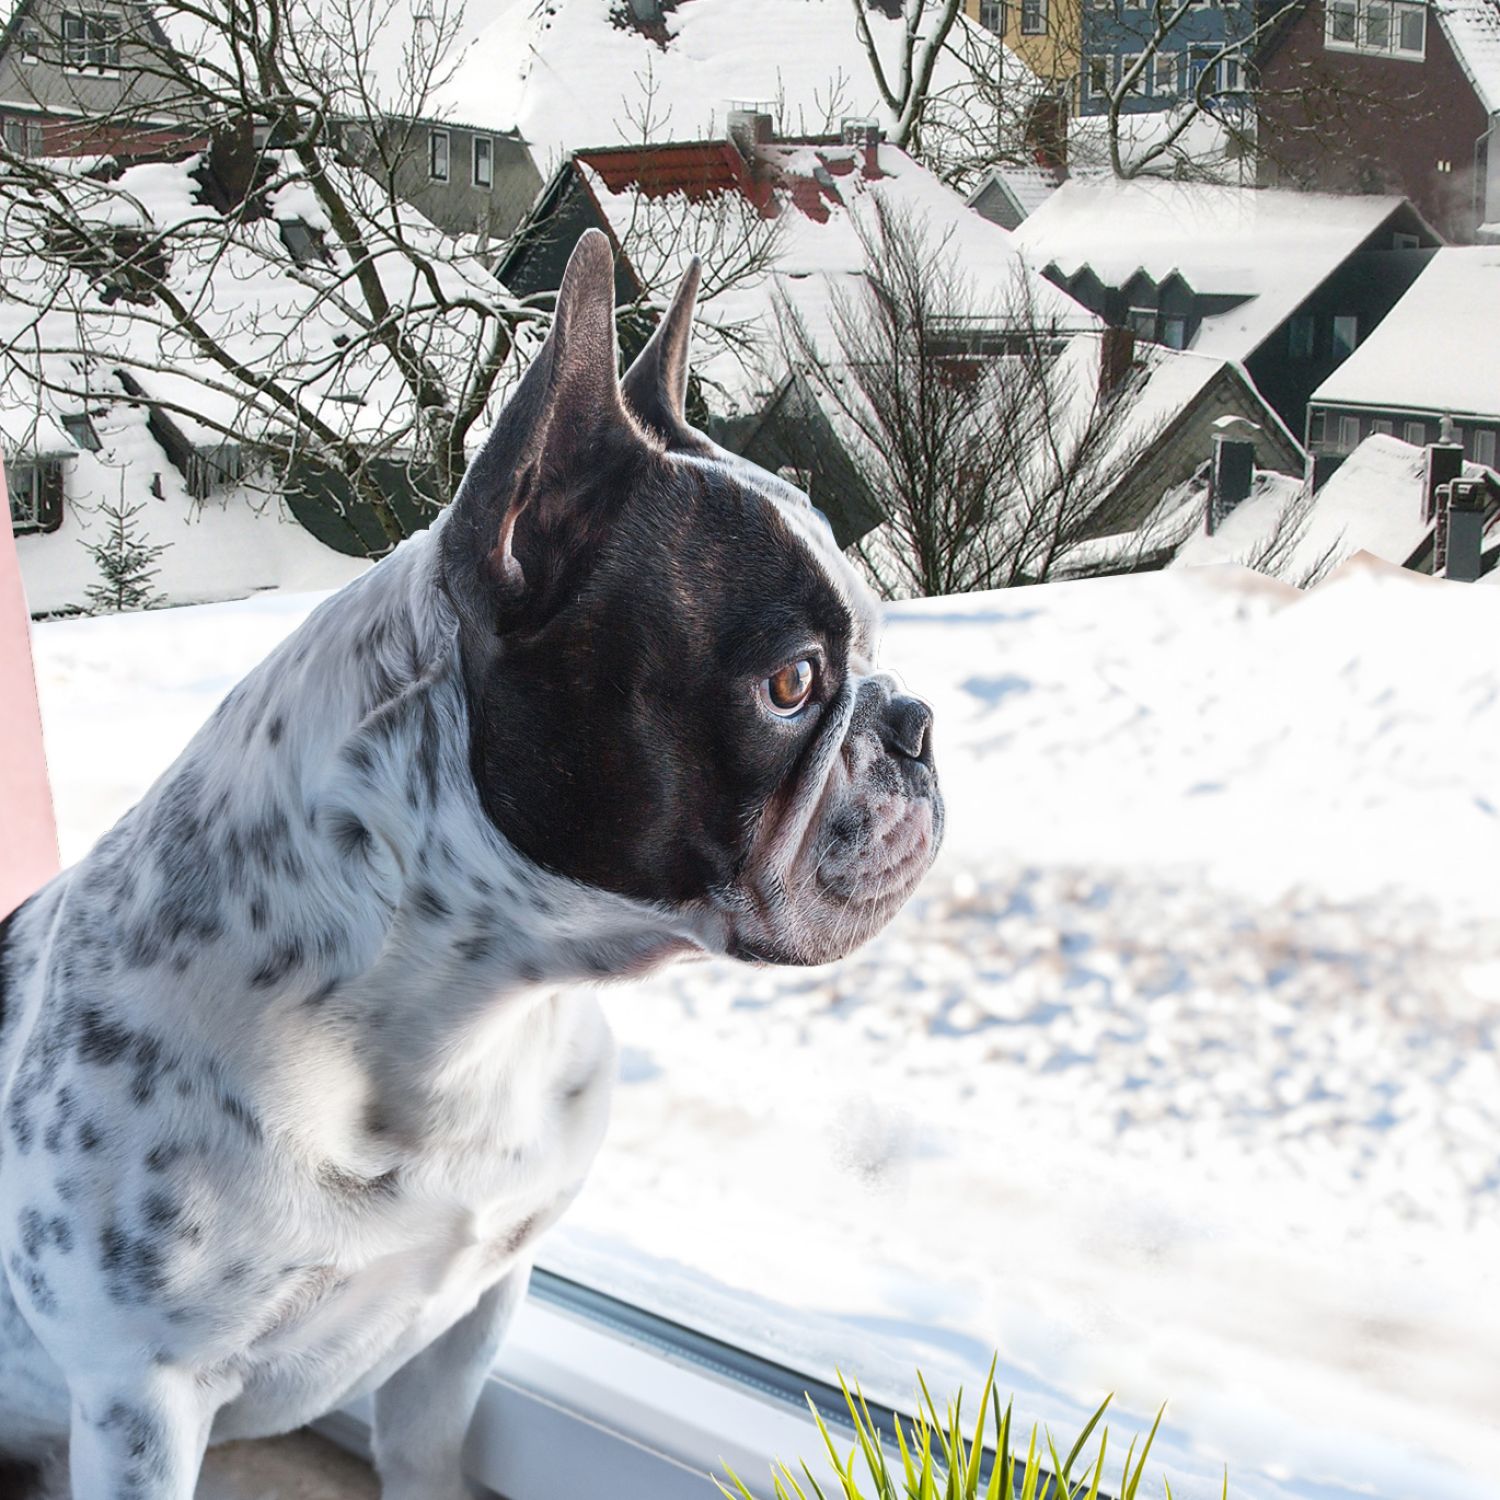 Dog looking out the window onto a snowy town